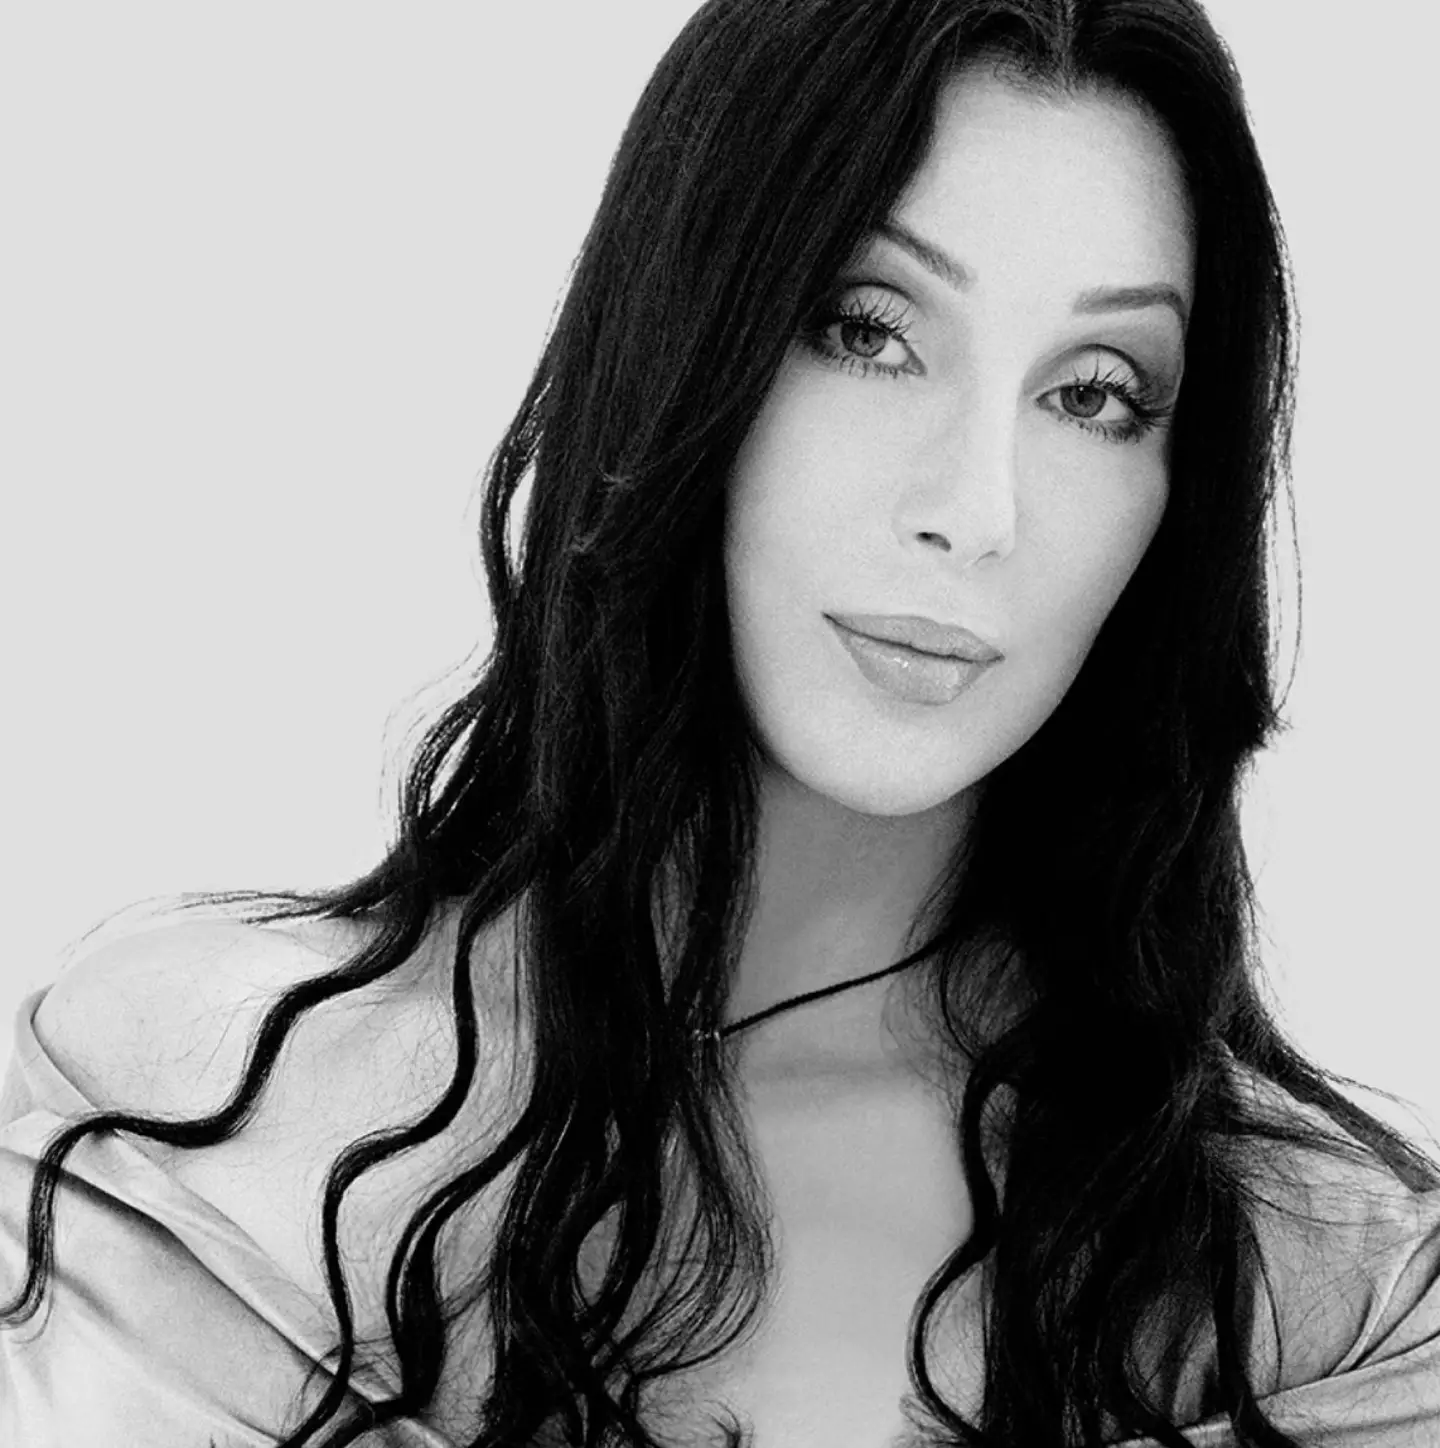 Cher keeps her skin youthful with Retin-A.